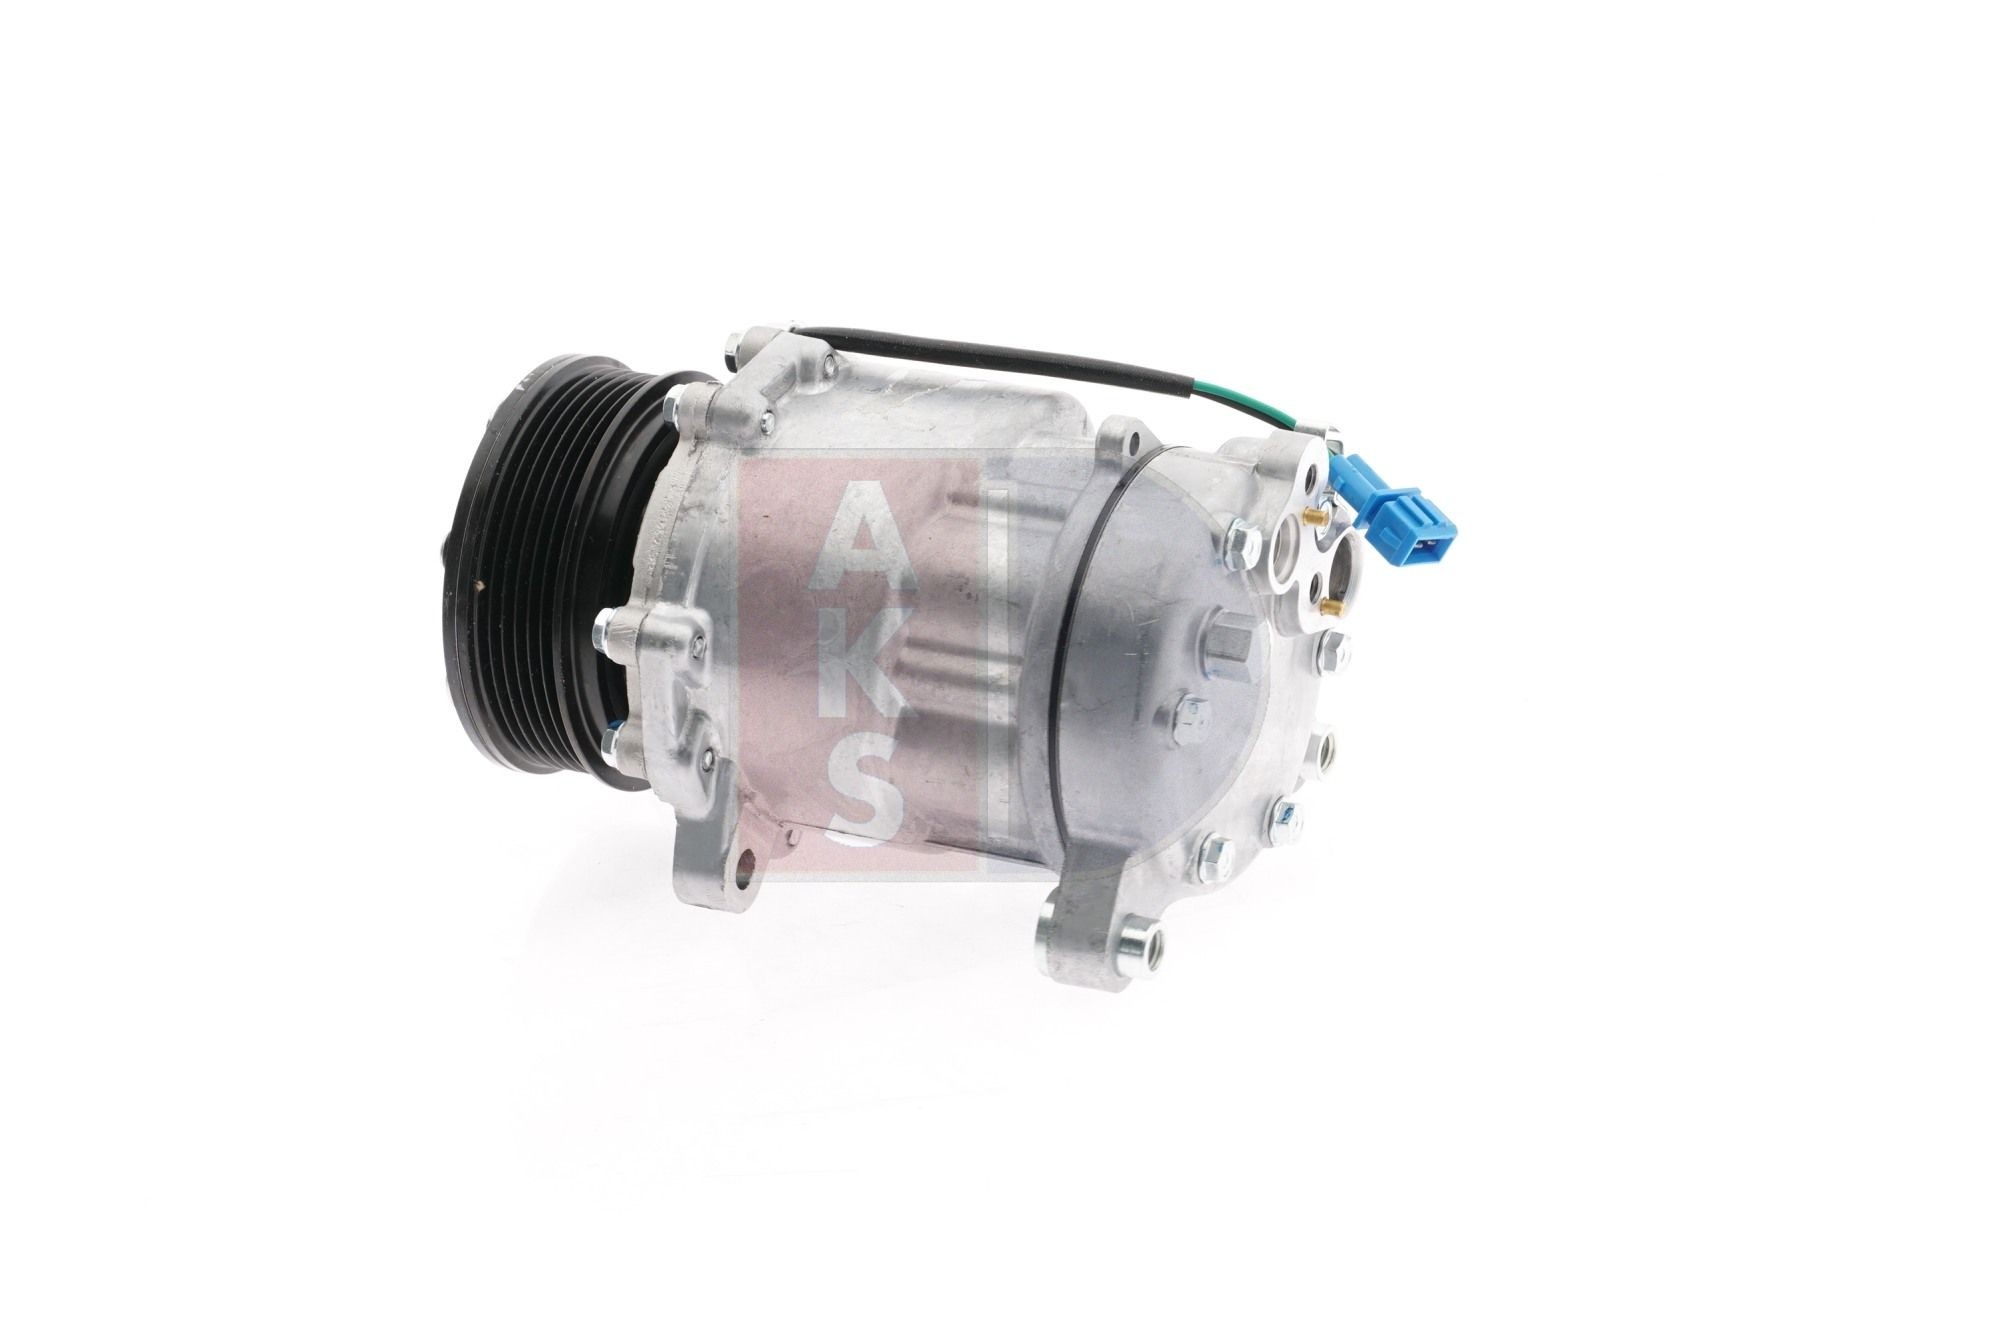 Air conditioning compressor 850240N from AKS DASIS